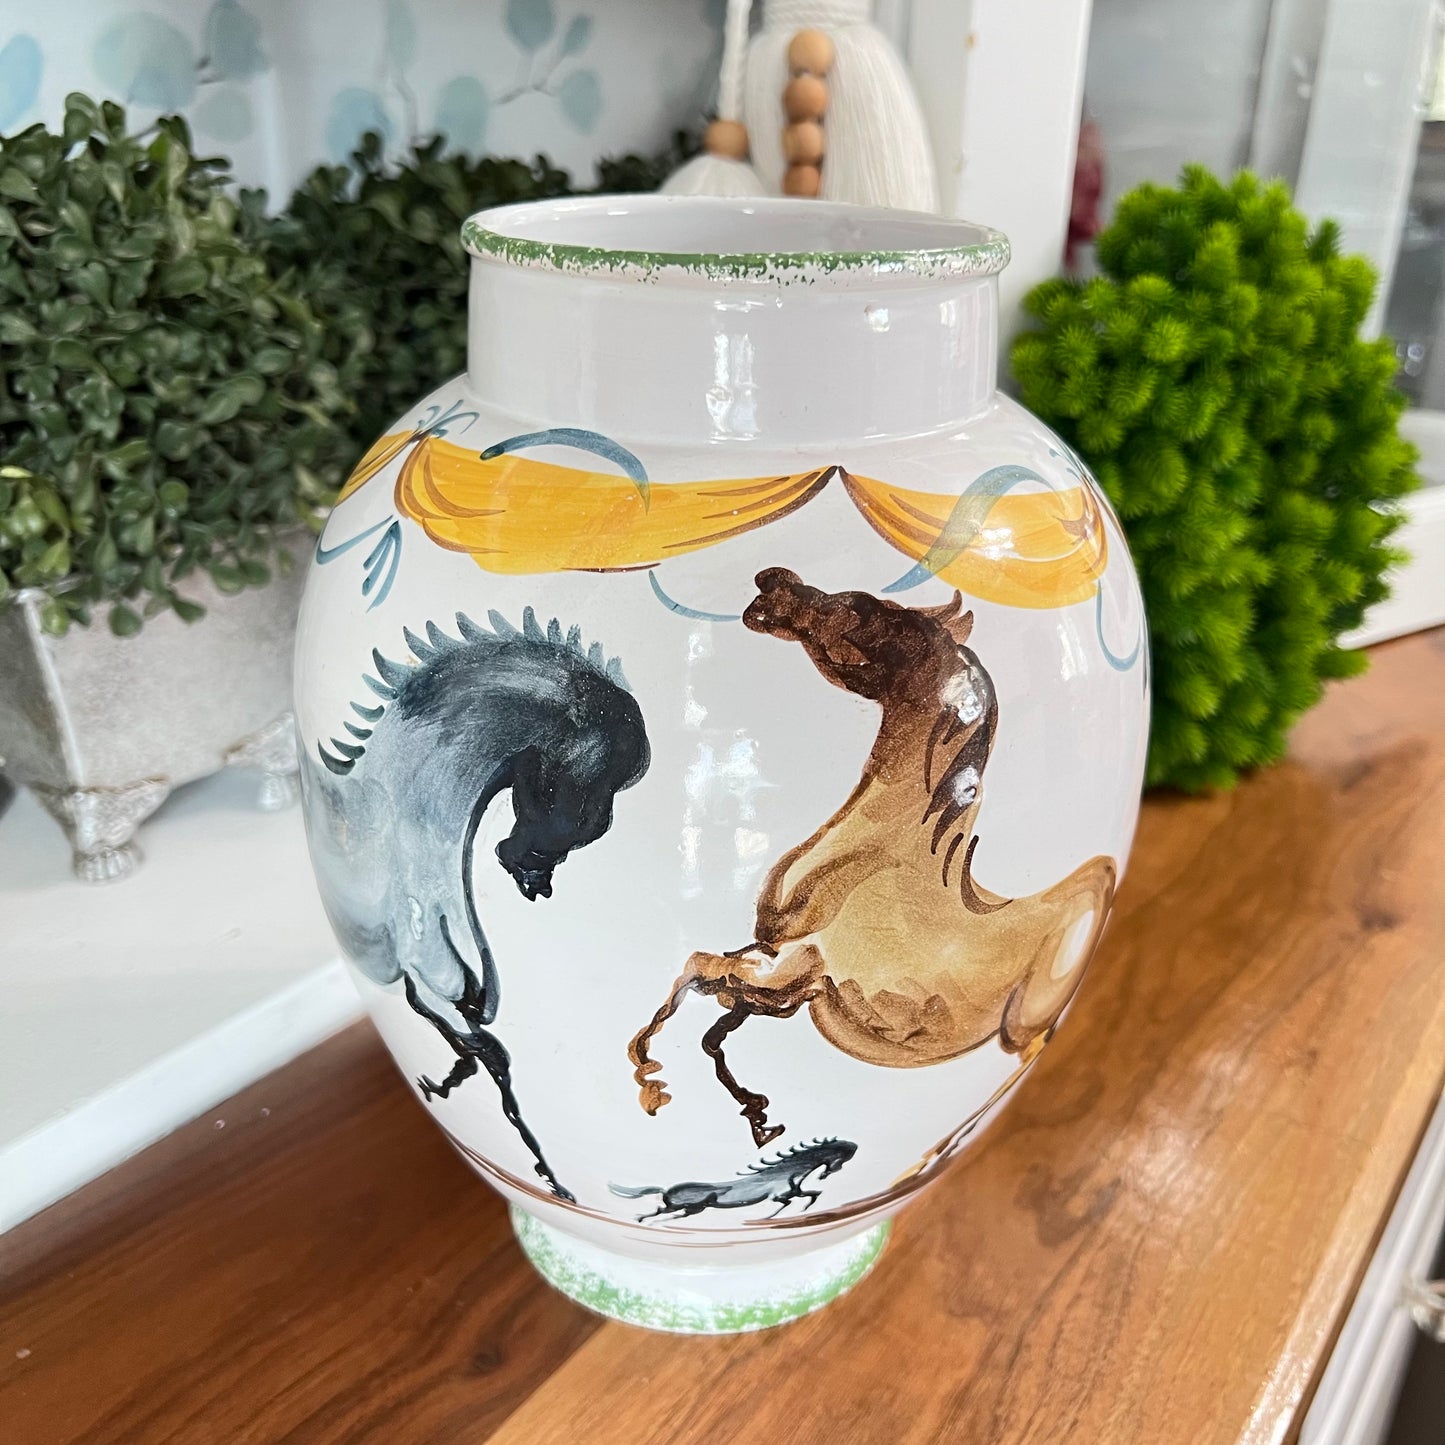 Ugo Zaccagnini Signed and Numbered Italian Hand Painted Tang Horses Vase 8.75